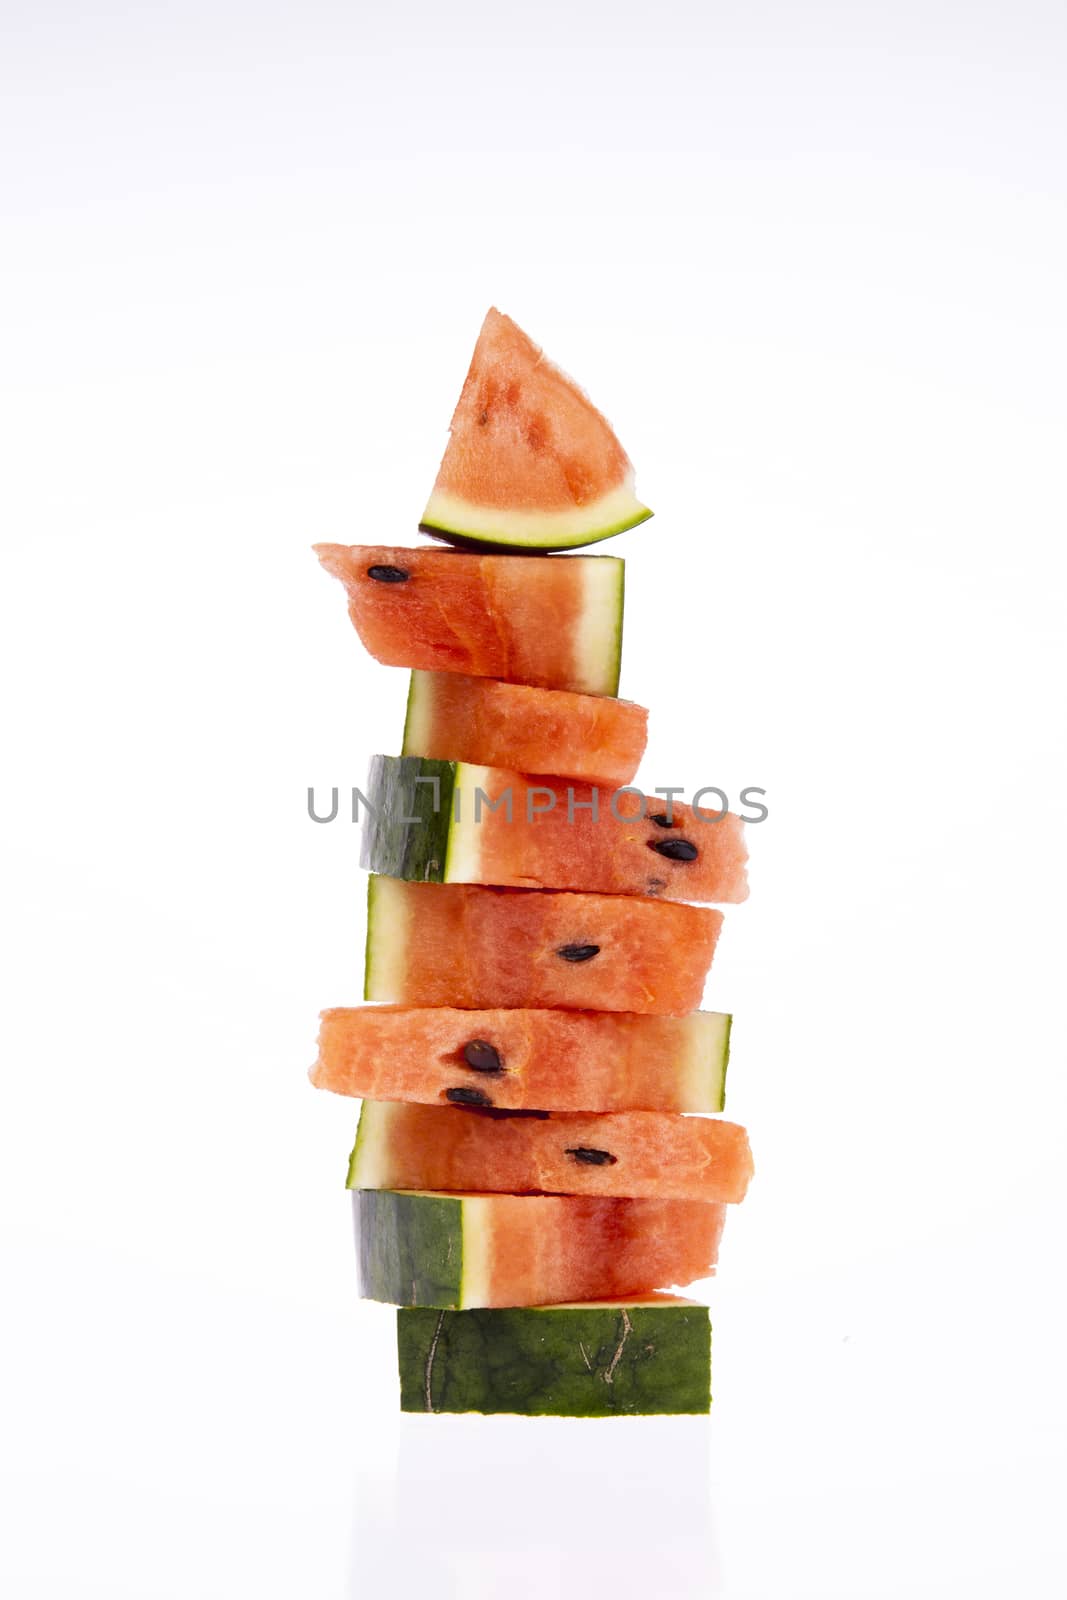 Typical and delicious slice of watermelon with whole watermelon